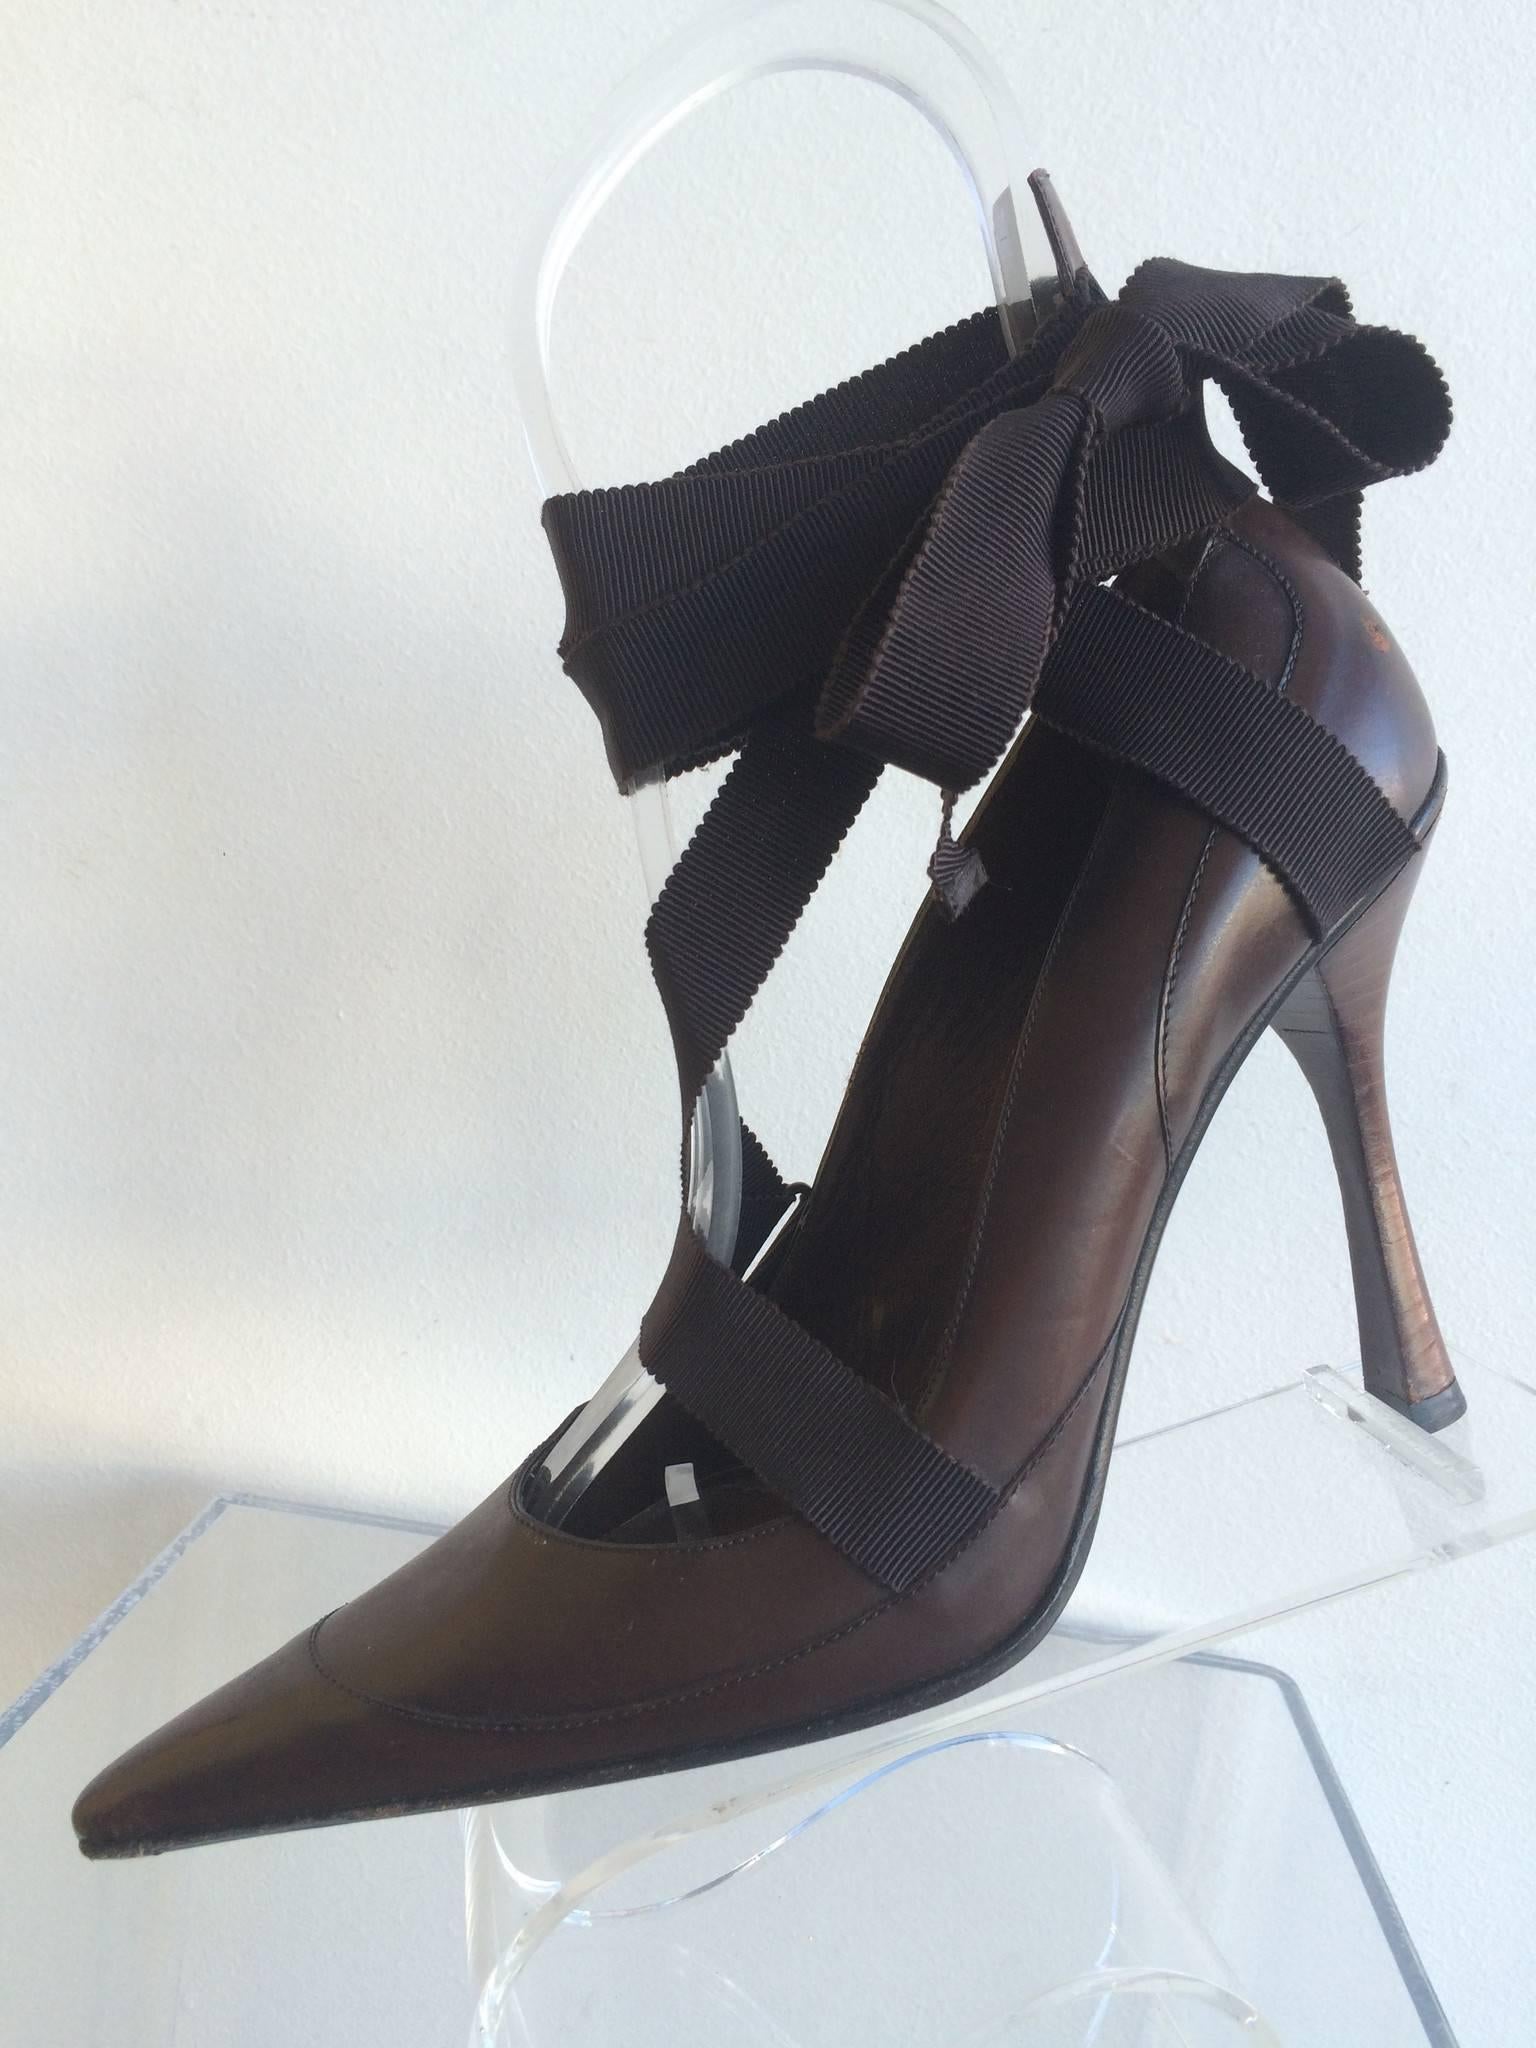 Gucci pointed Winklepicker brown leather pumps with ribbon fastener.

Size Marked: 7B
Heel Height: 4